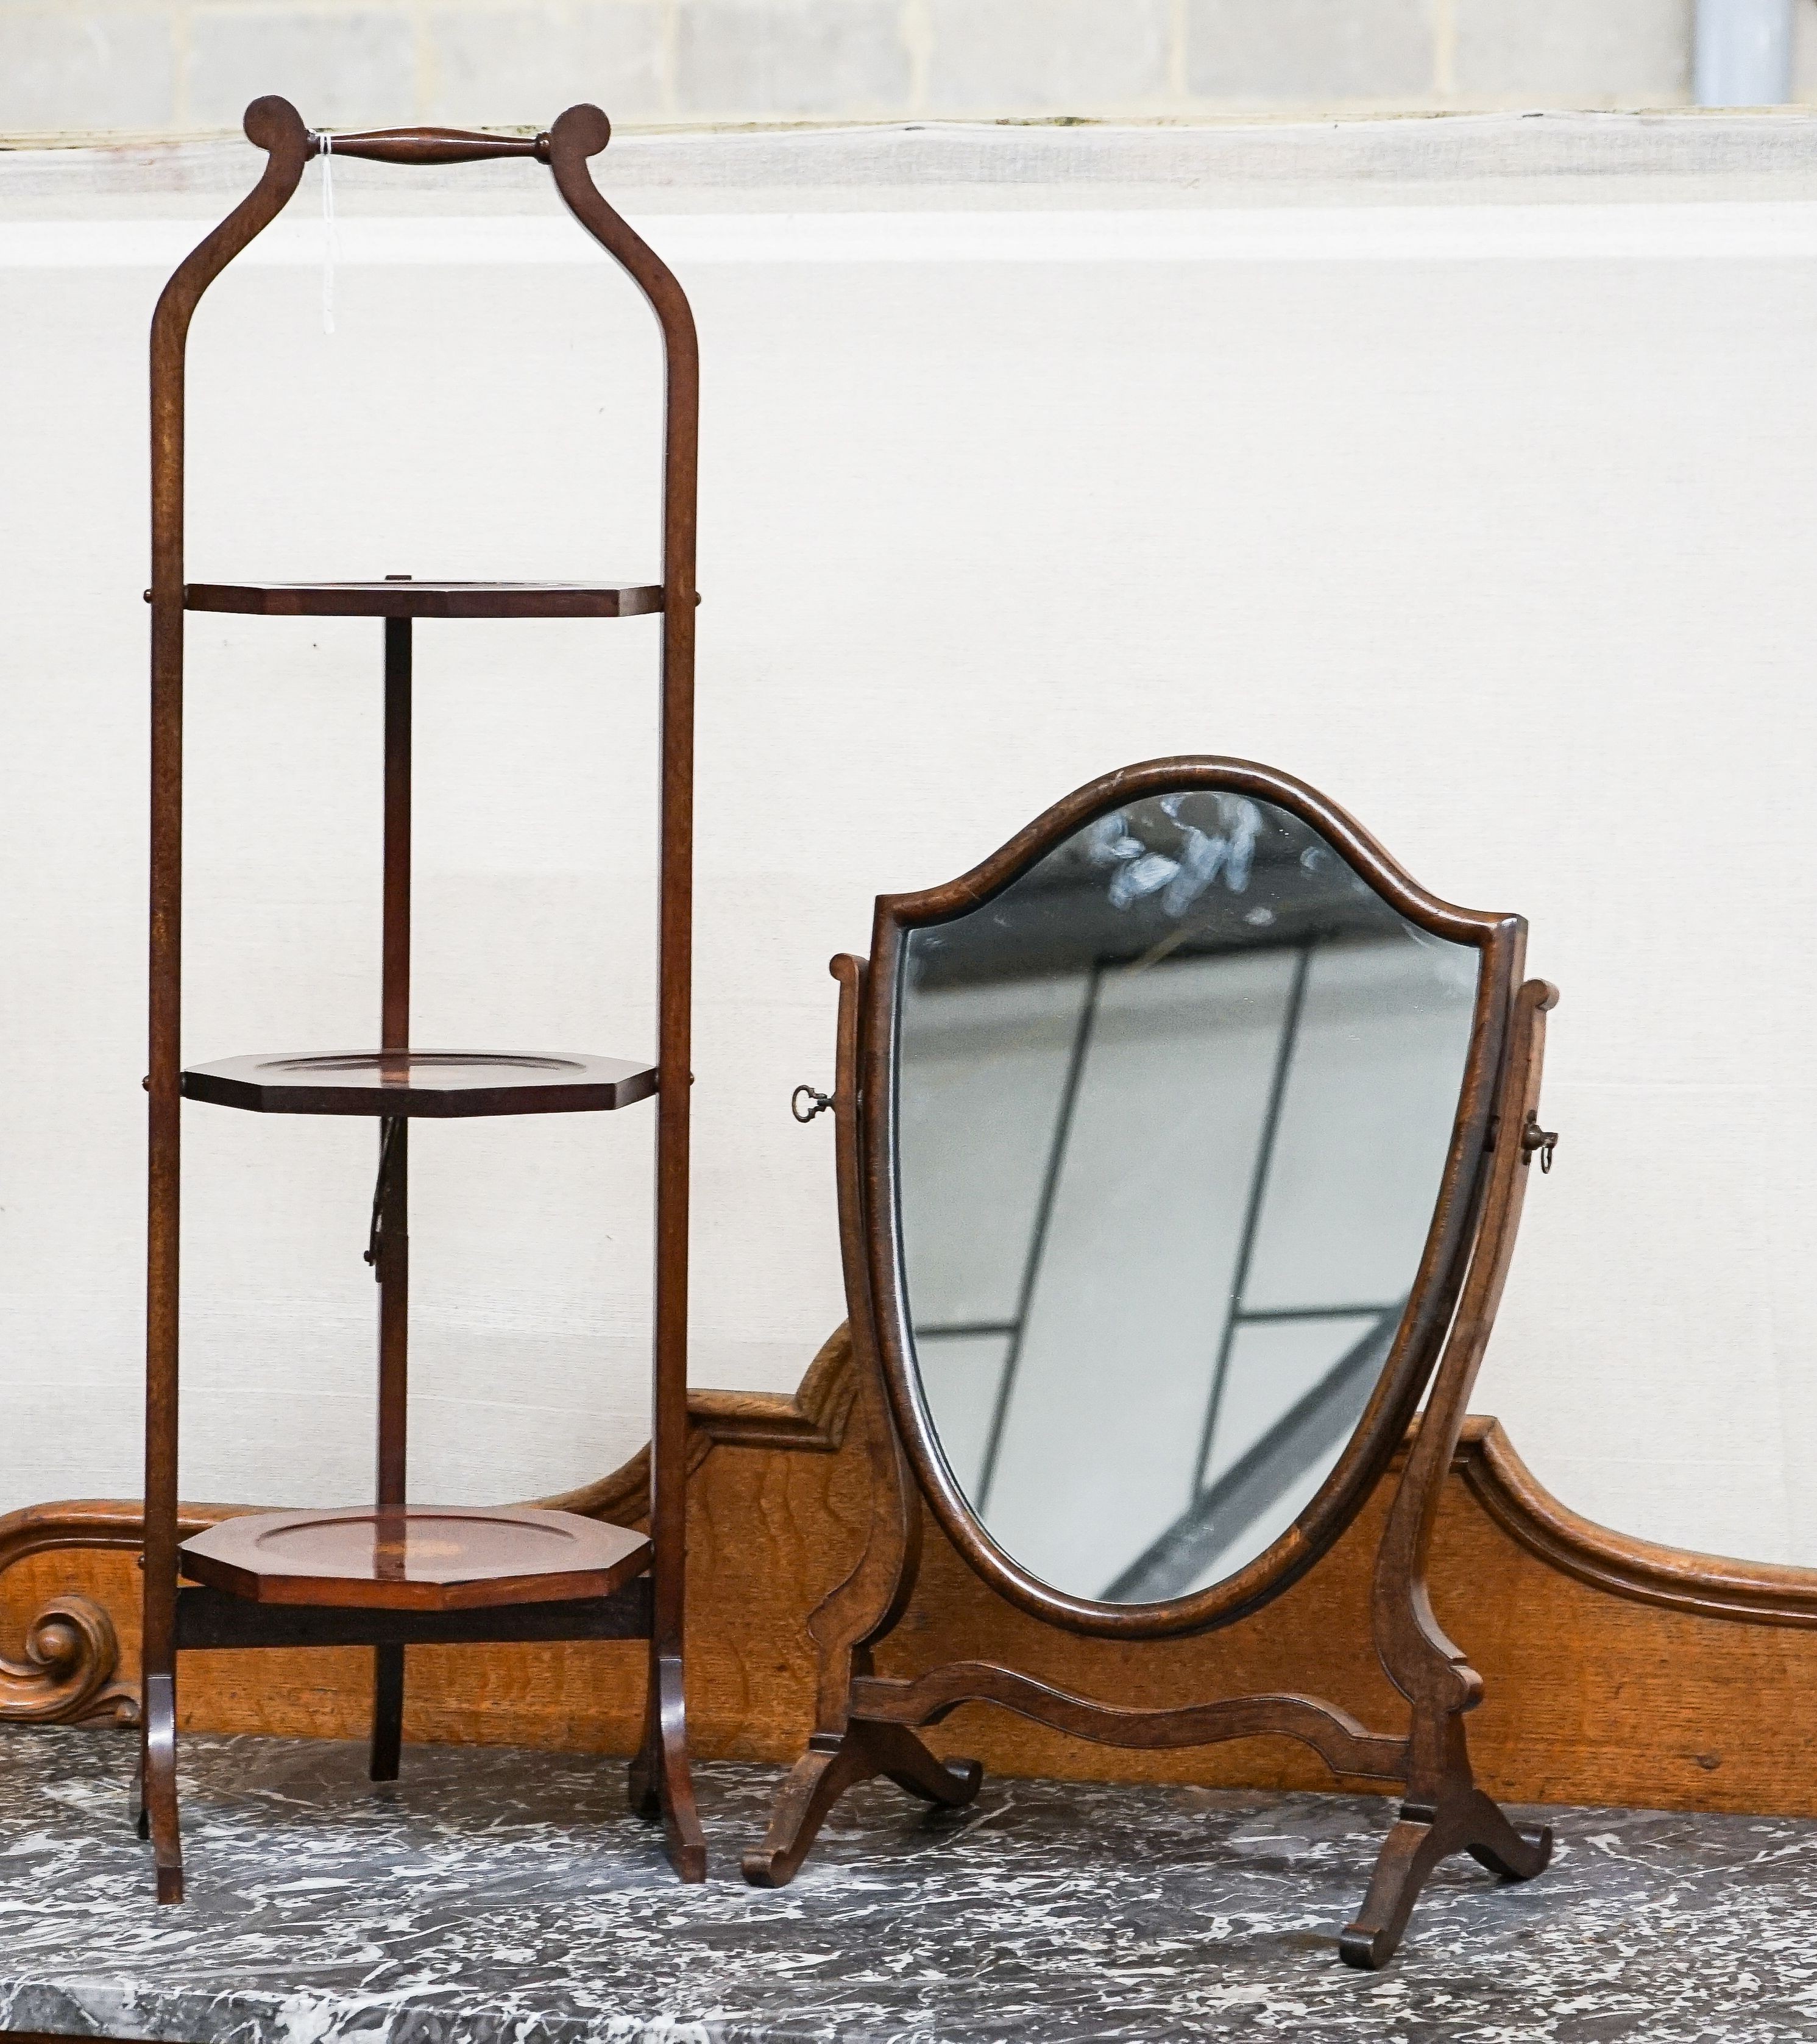 An Edwardian cake stand together with a skeleton framed toilet mirror